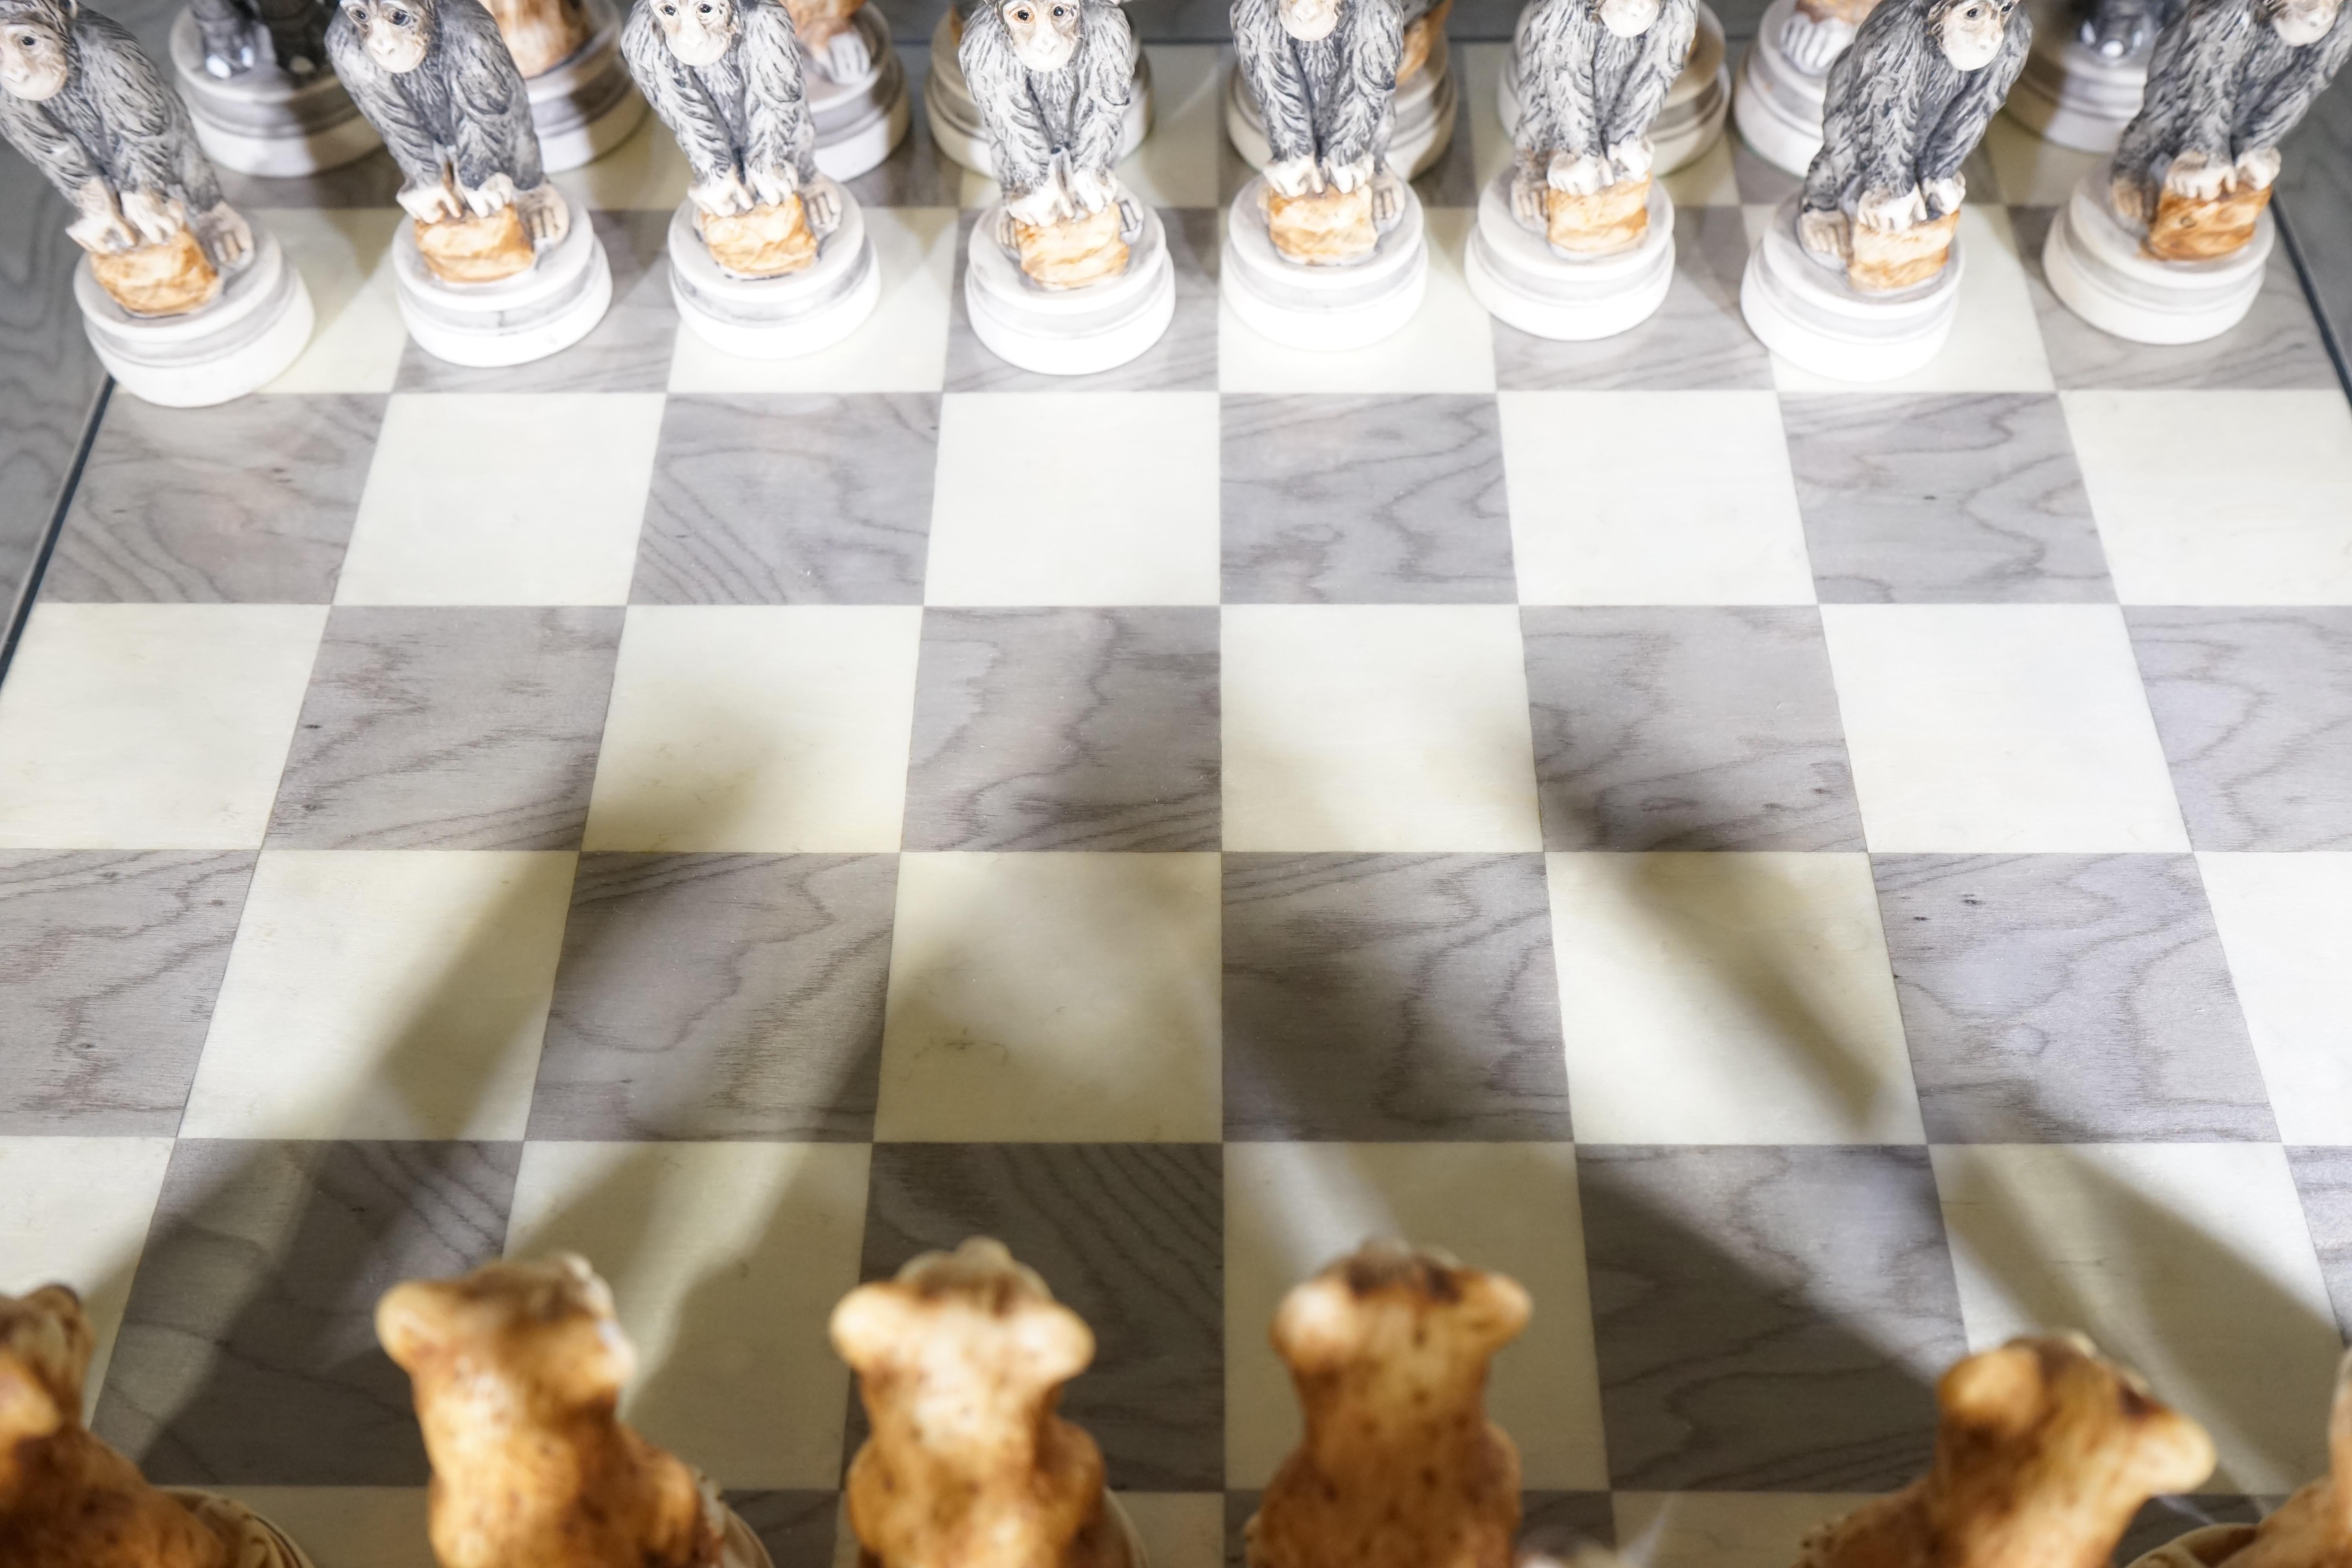 Vintage signed Nigri animal kingdom chess set. Entirely hand painted and signed. Pieces vary in size with a wooden chessboard. Animal chess pieces range from tigers, lions, snakes, monkeys elephants, and more. Very rare.